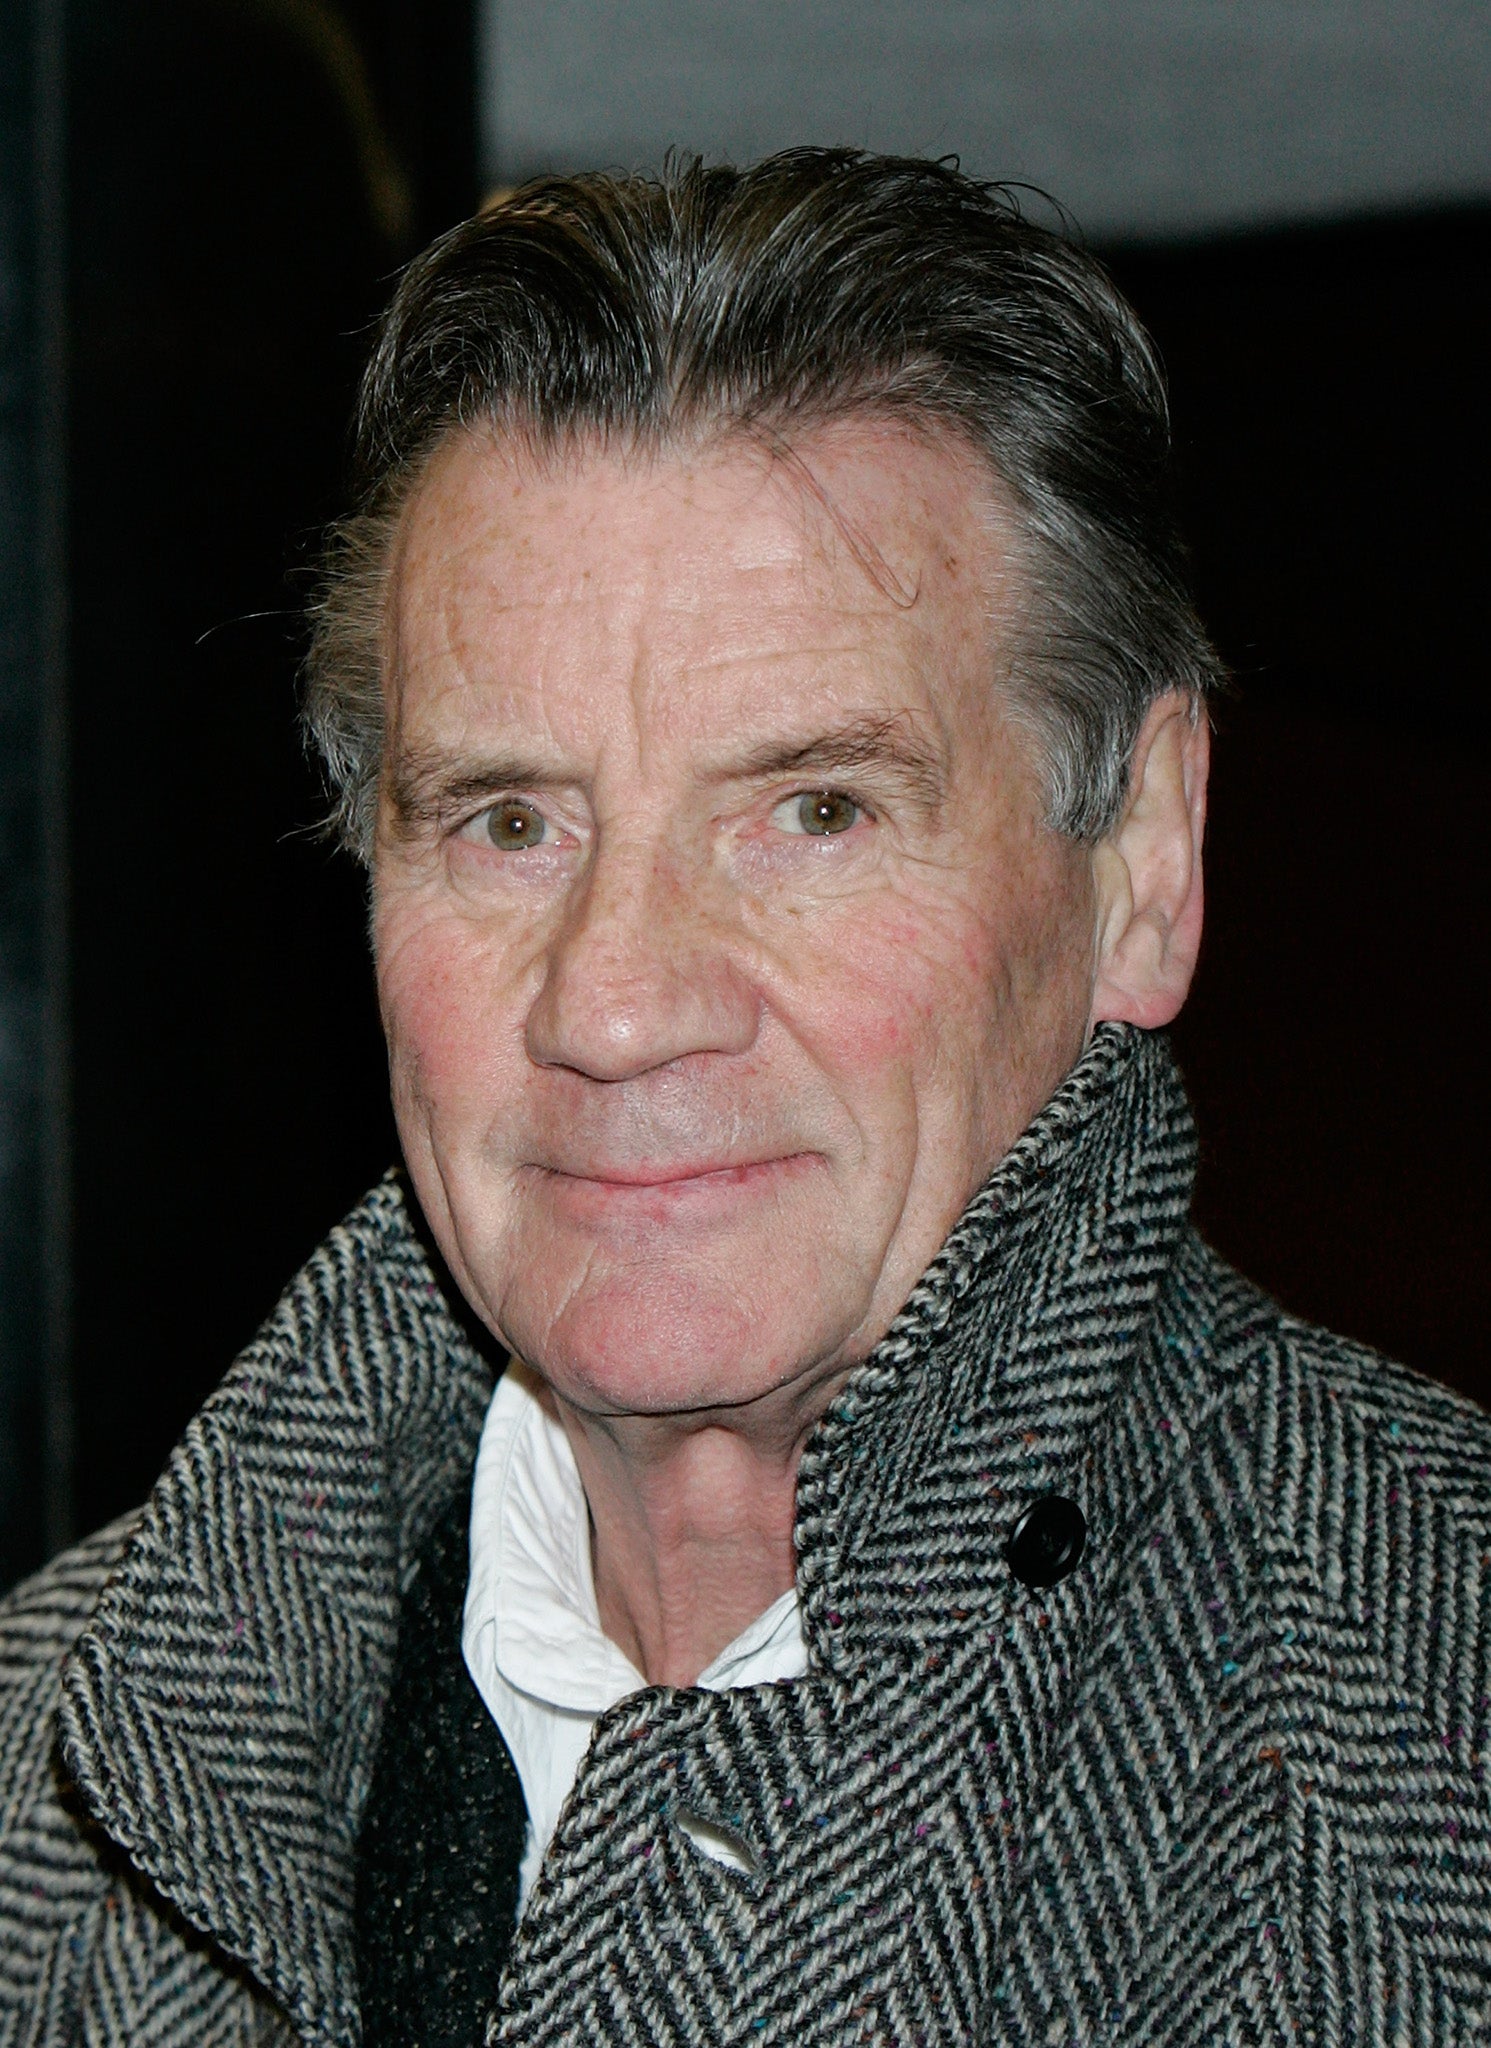 From Trench coat to Trench warfare: Michael Palin is to star in a new BBC WW1 drama